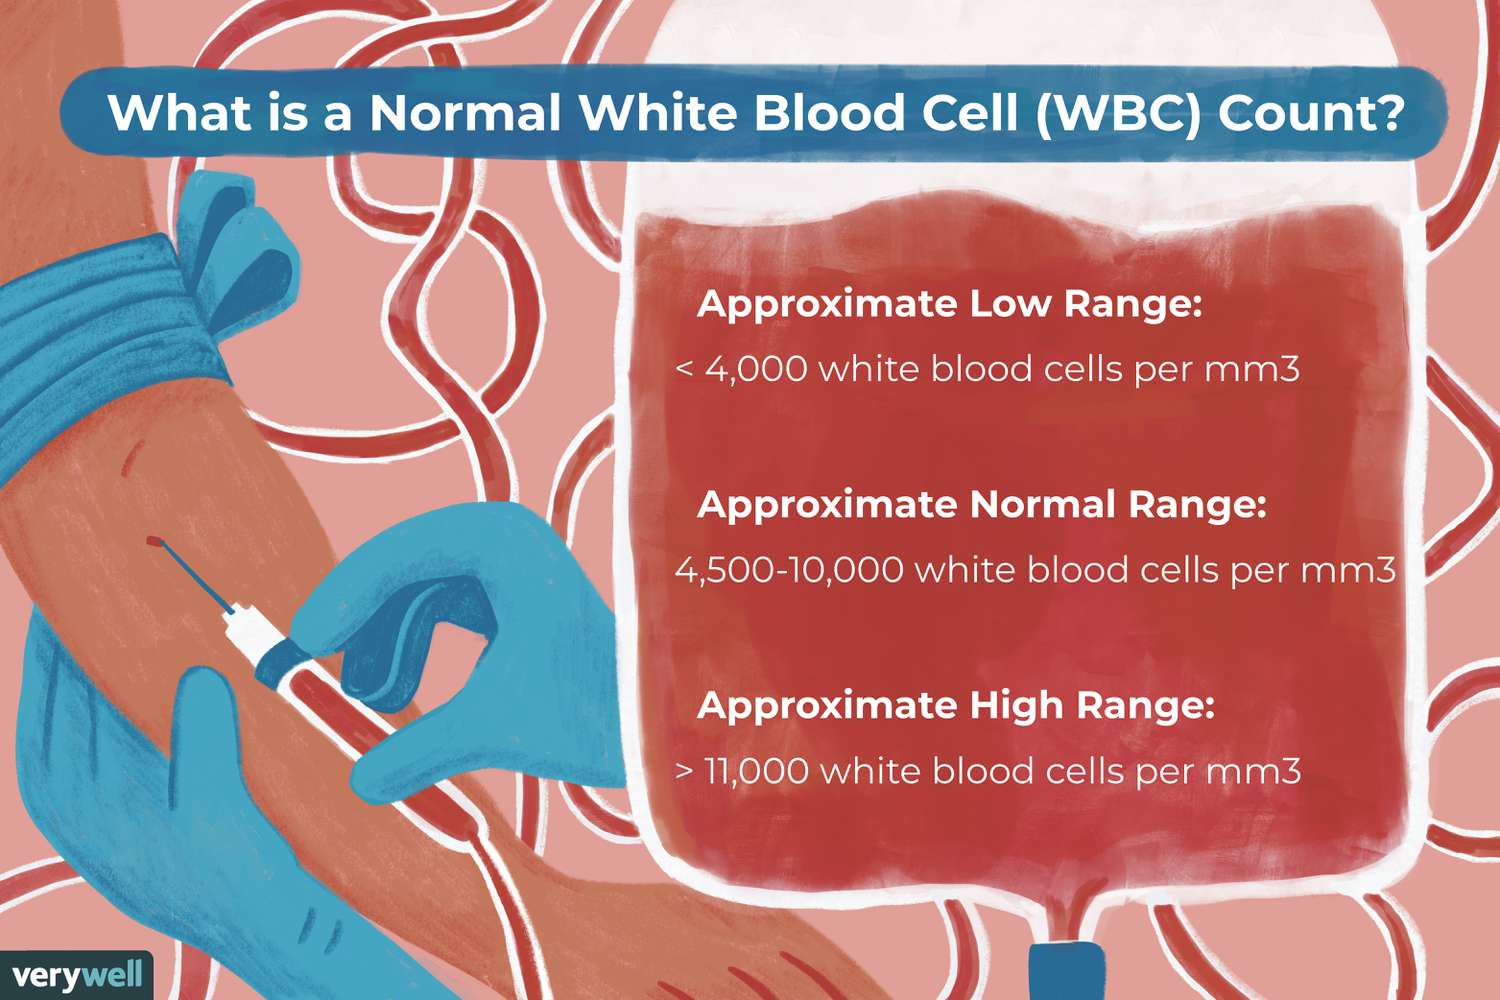 Normal white blood cell count